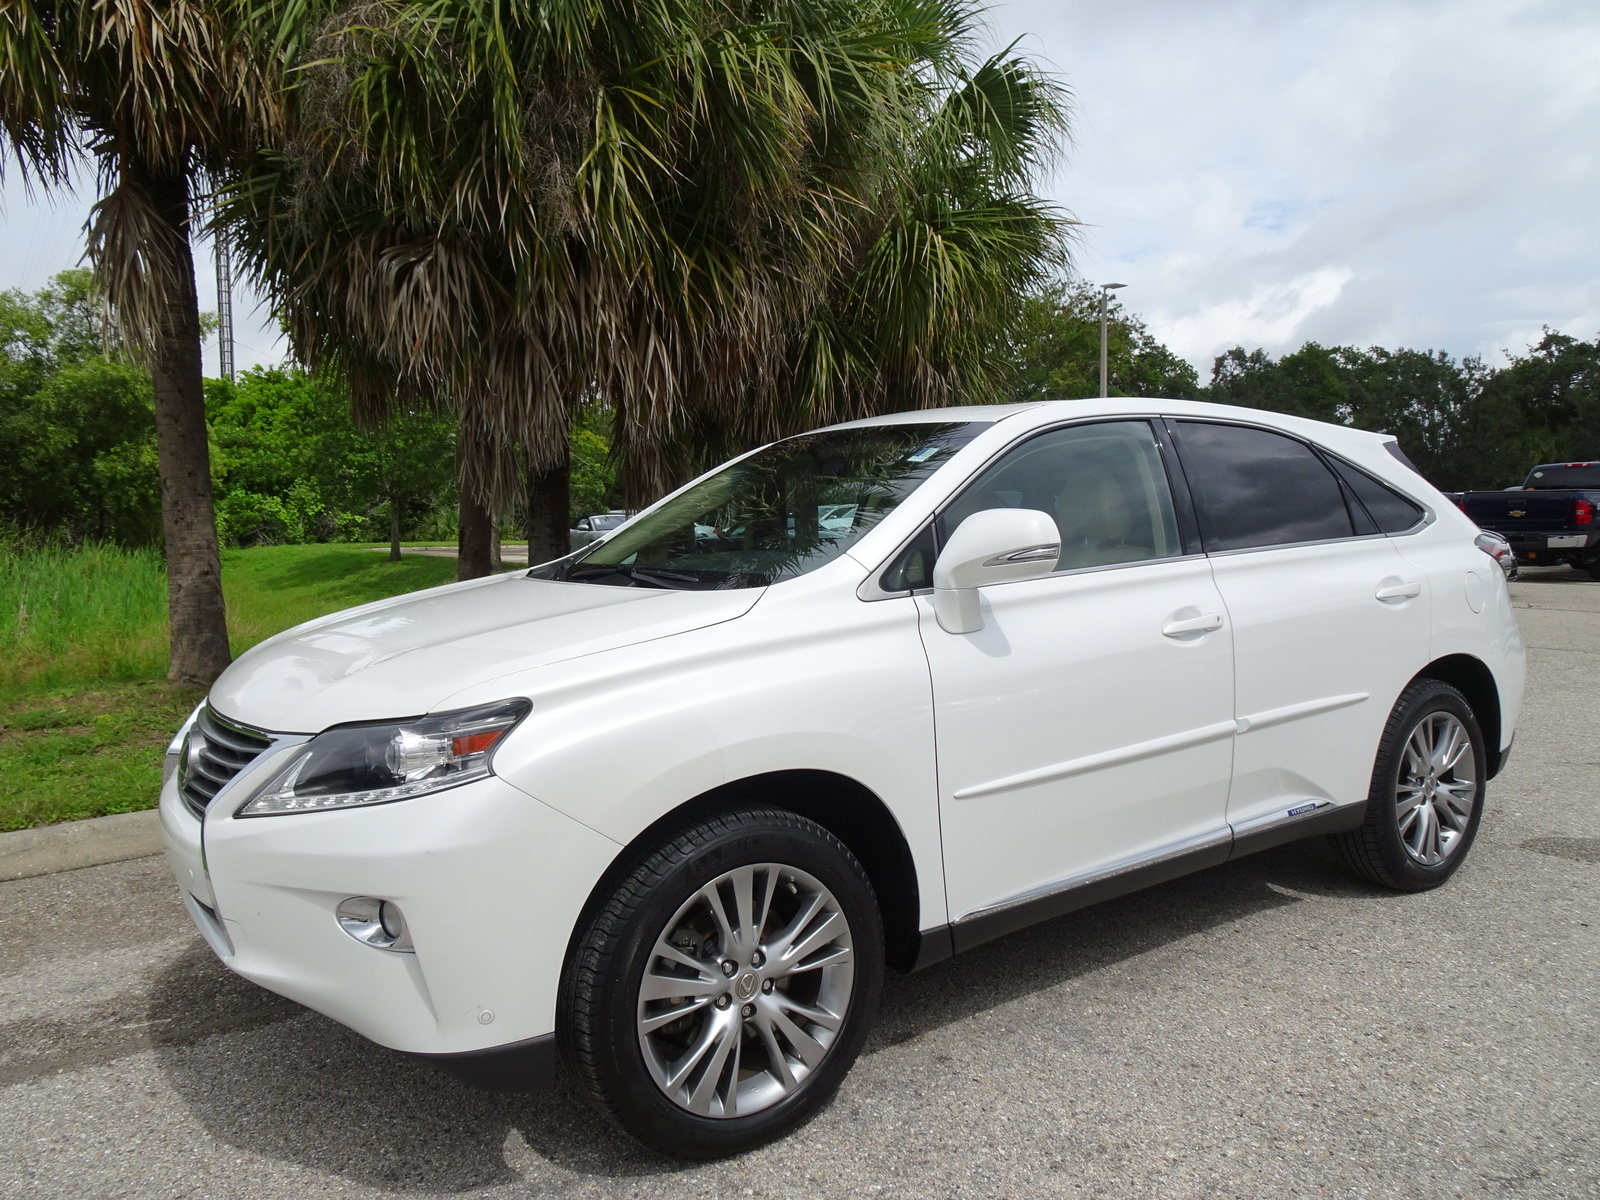 PreOwned 2013 Lexus RX 450h Sport Utility in Sarasota 